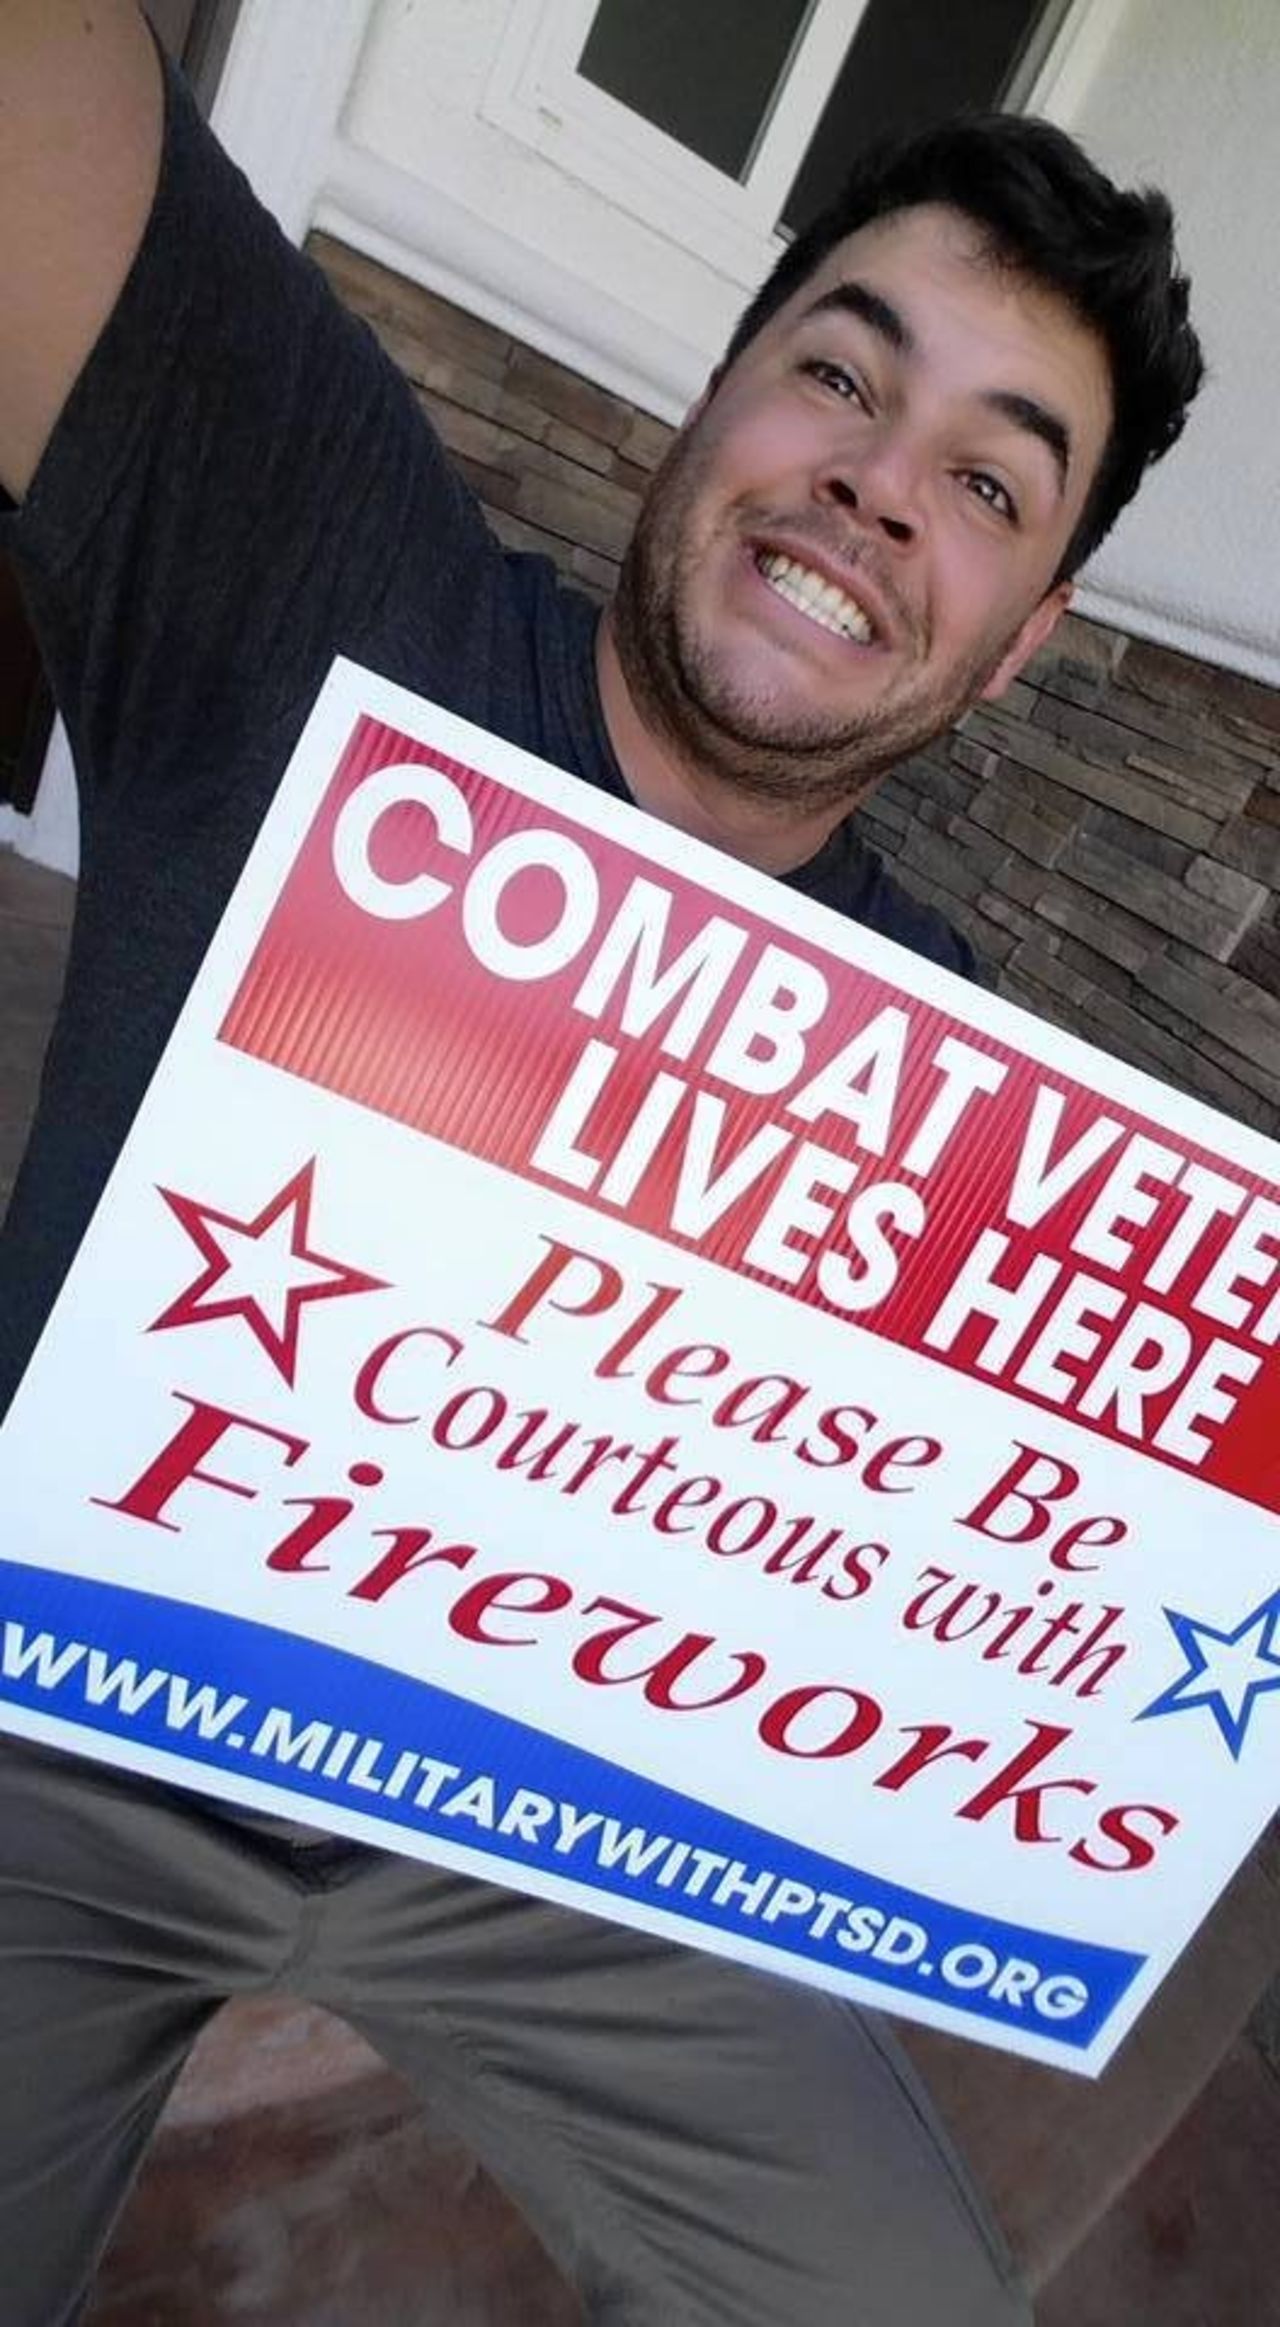 The signs ask that neighbors be courteous with fireworks near the Fourth of July by warning combat veterans. Vets like Chris Dumont, pictured above, may experience symptoms of PTSD due to the loud, explosive noises. 